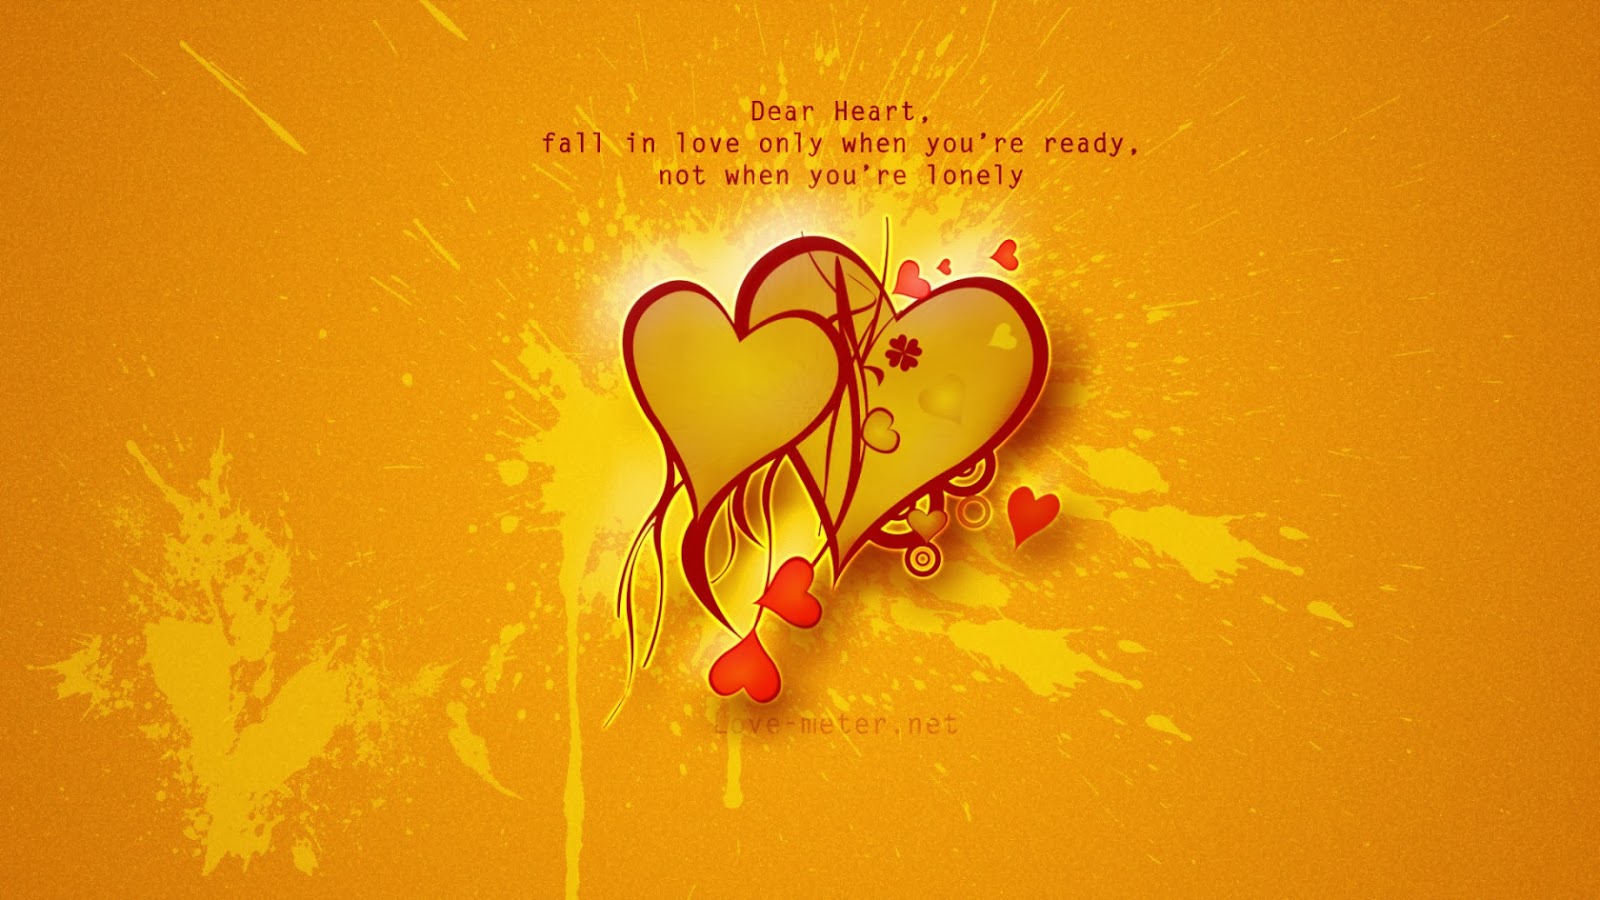 Inspirational Love  Quotes  About Love  Amazing HD  Wallpapers 